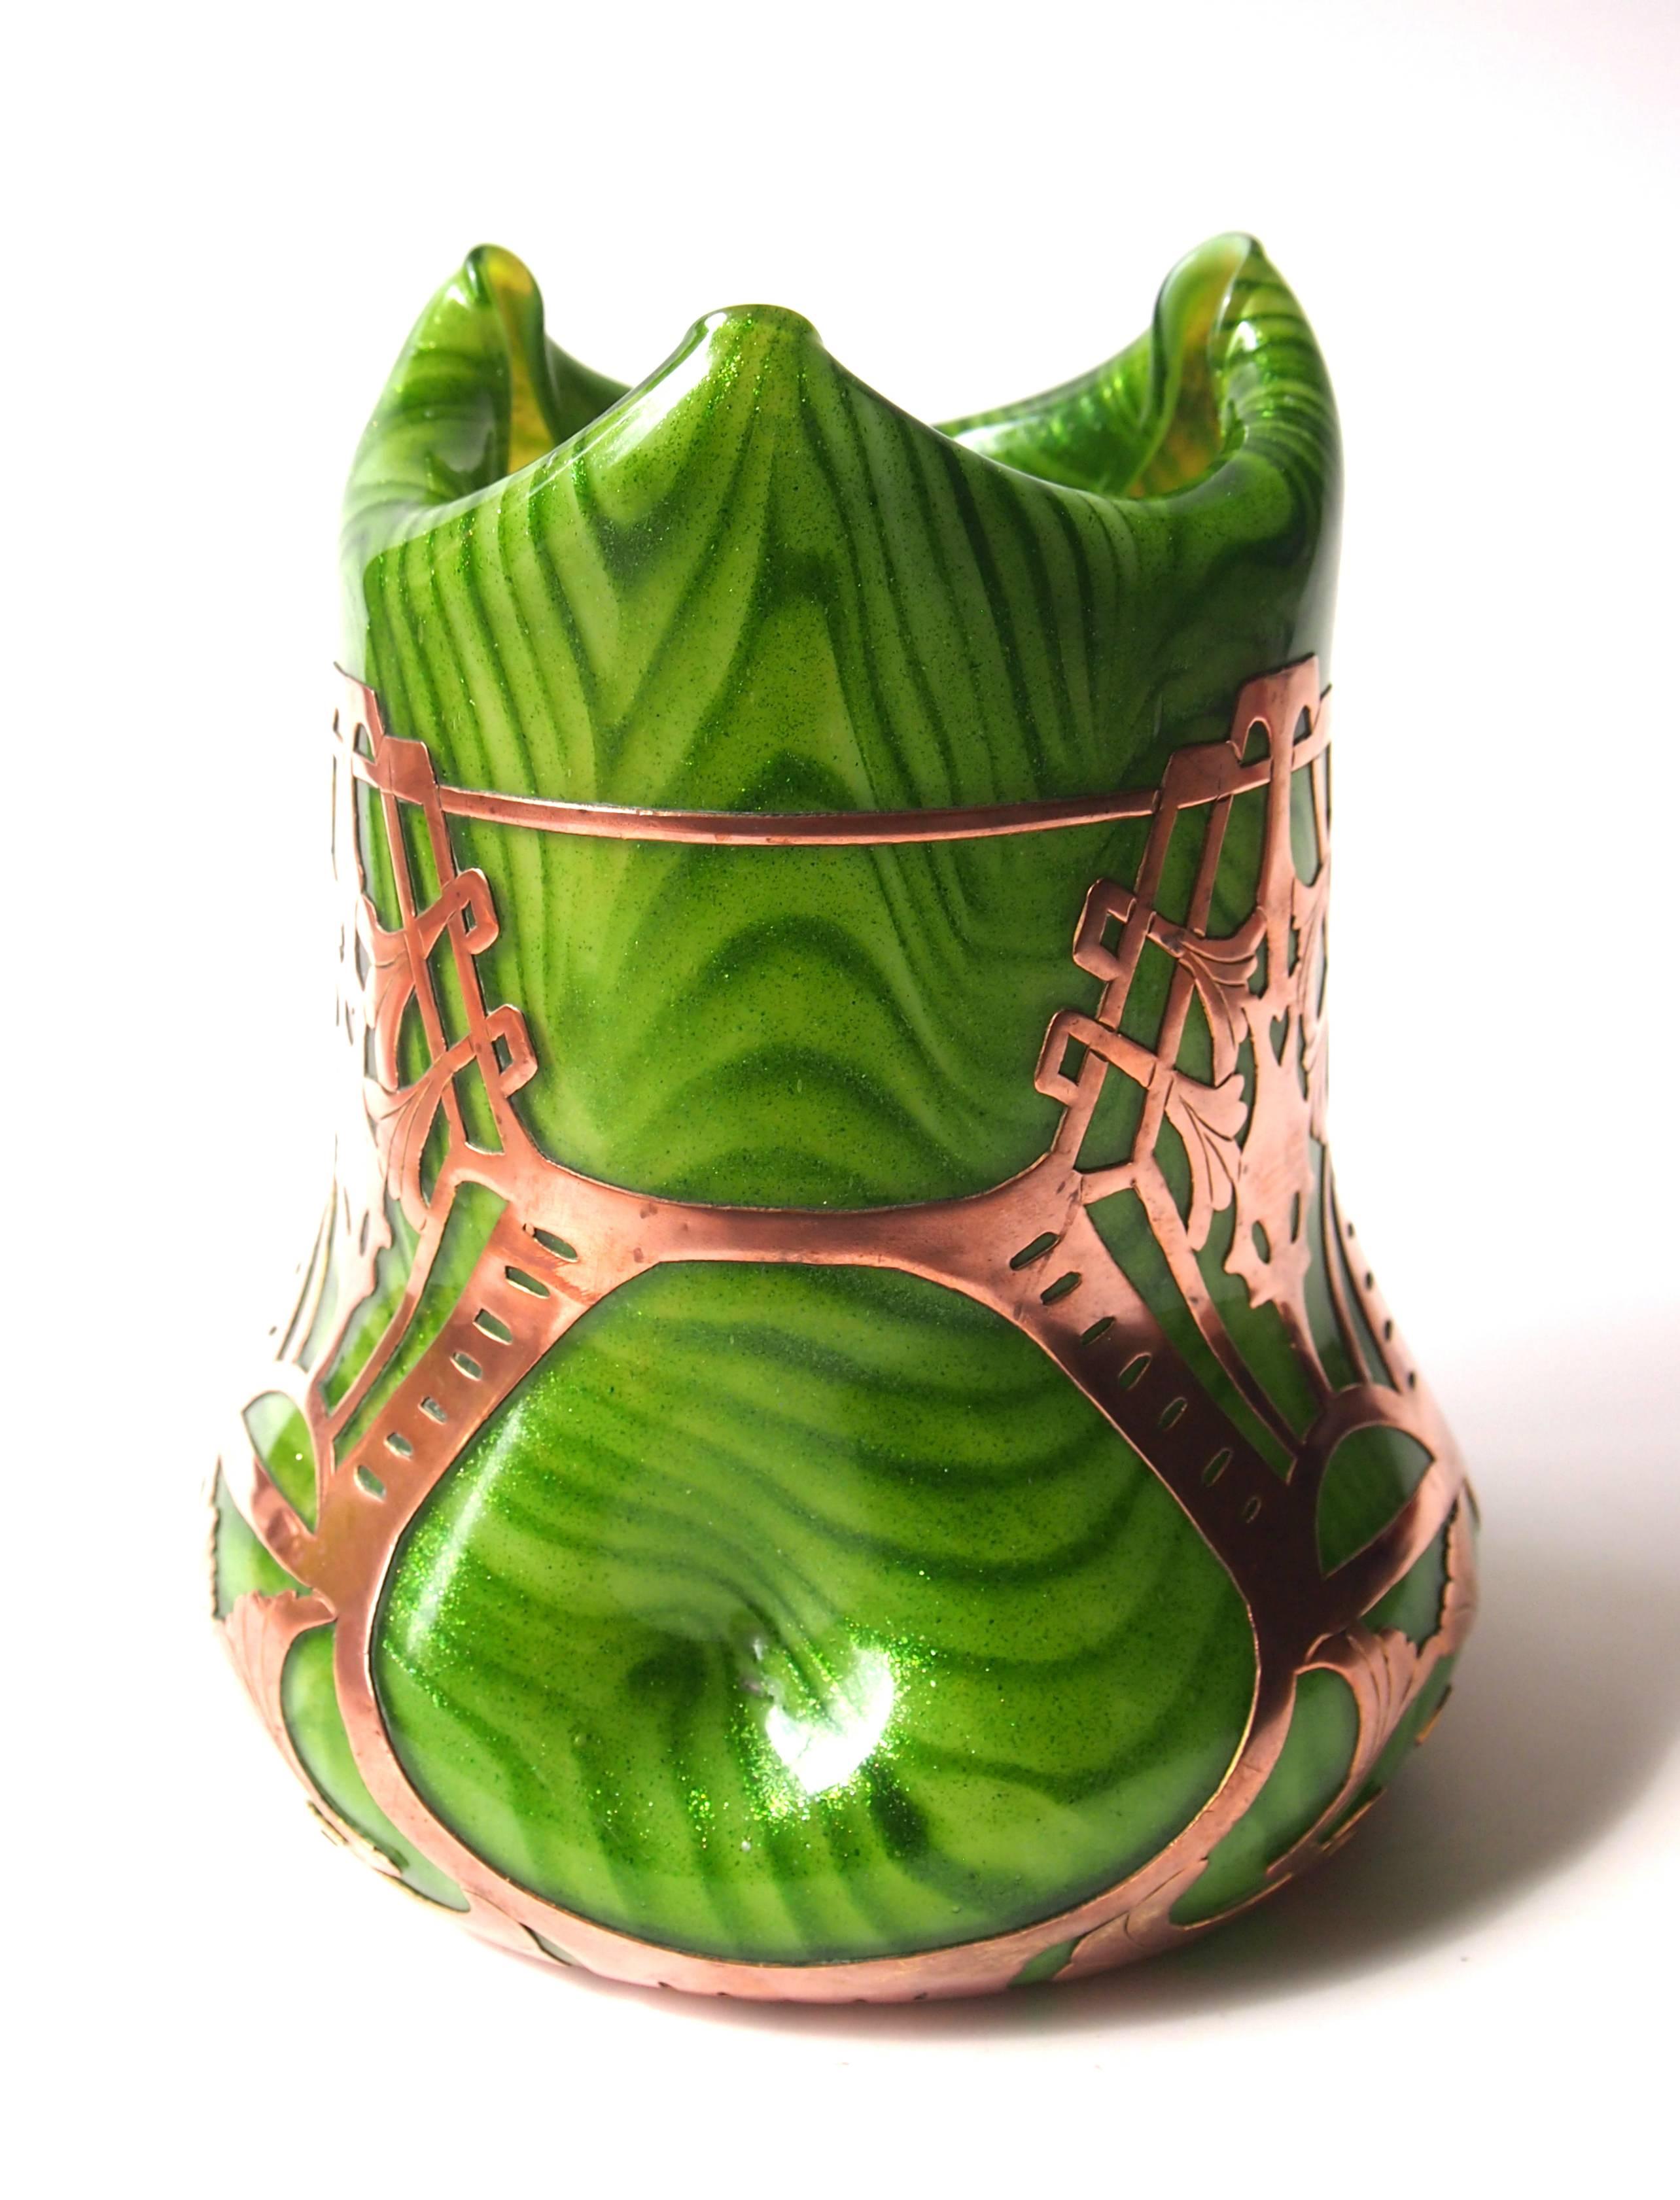 Superior Art Nouveau Rindskopf banded green aventurine vase with Vienna Sessesionist style copper cladding. The glass vase is a great period shape with three dimples and three points the copper overlay has particularly fine detail. 

Rindskopf was